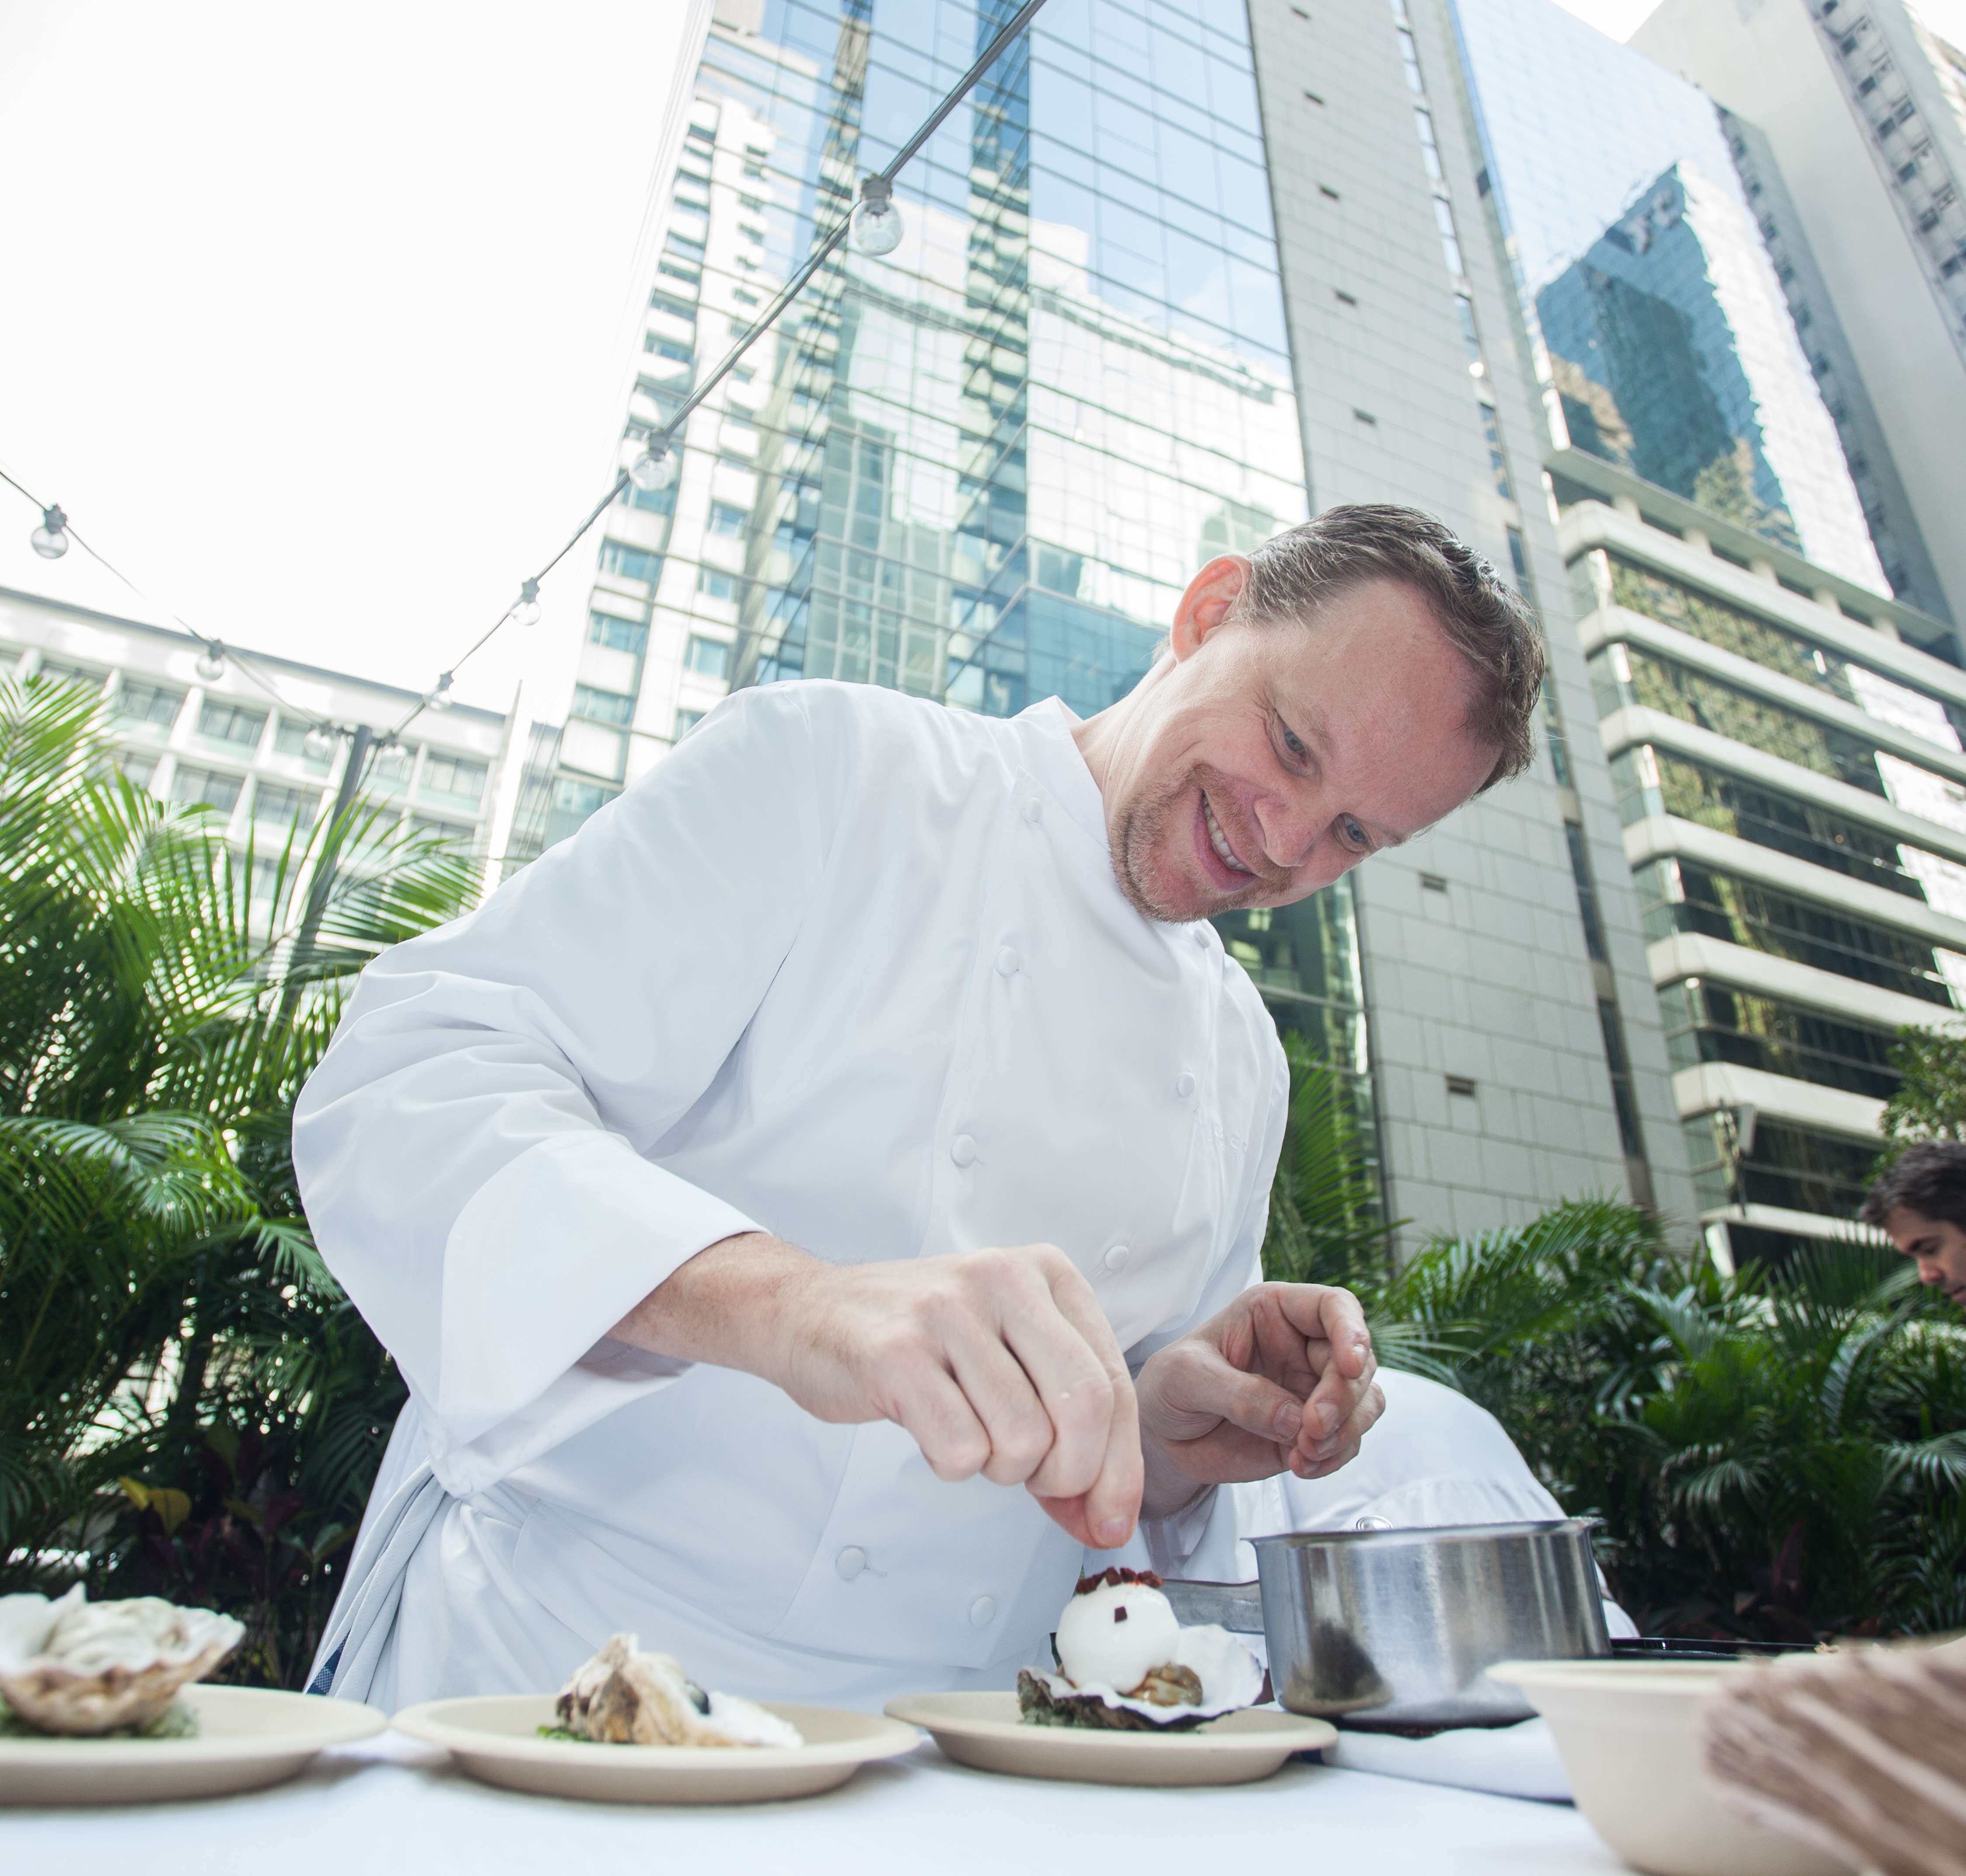 Chef Richard Ekkebus applies the finishing touches to a dish from Amber restaurant at Taste of Hong Kong.